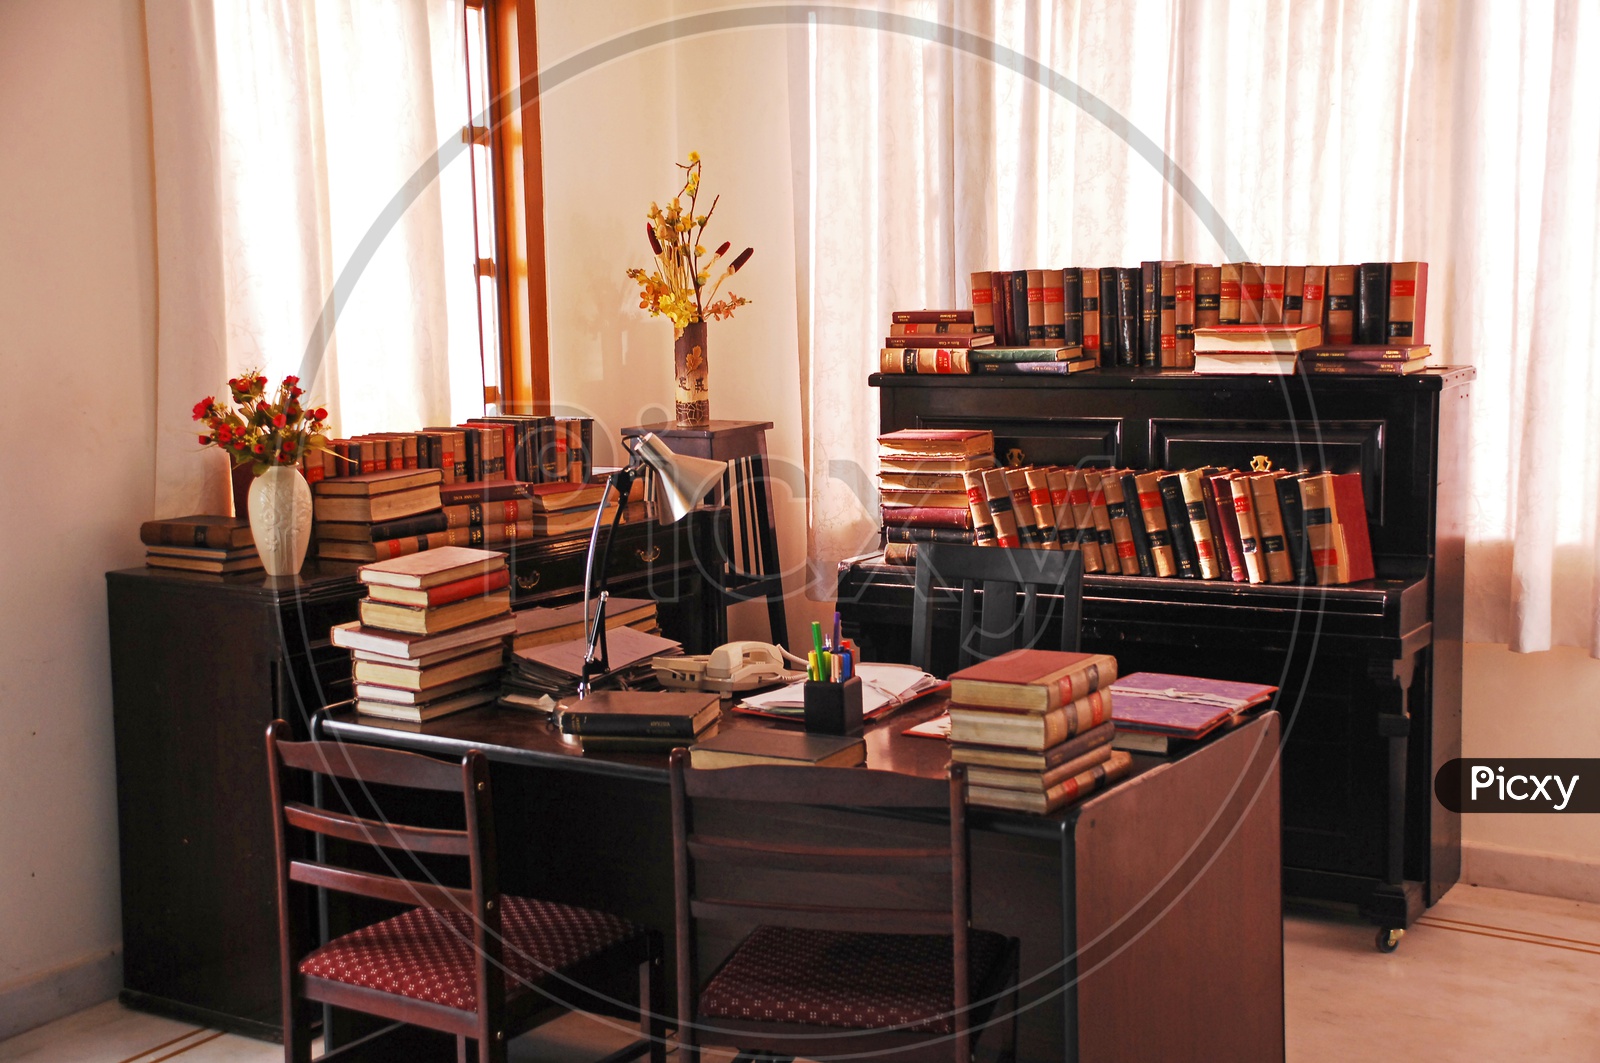 Lawyer office Room With Books in Shelf